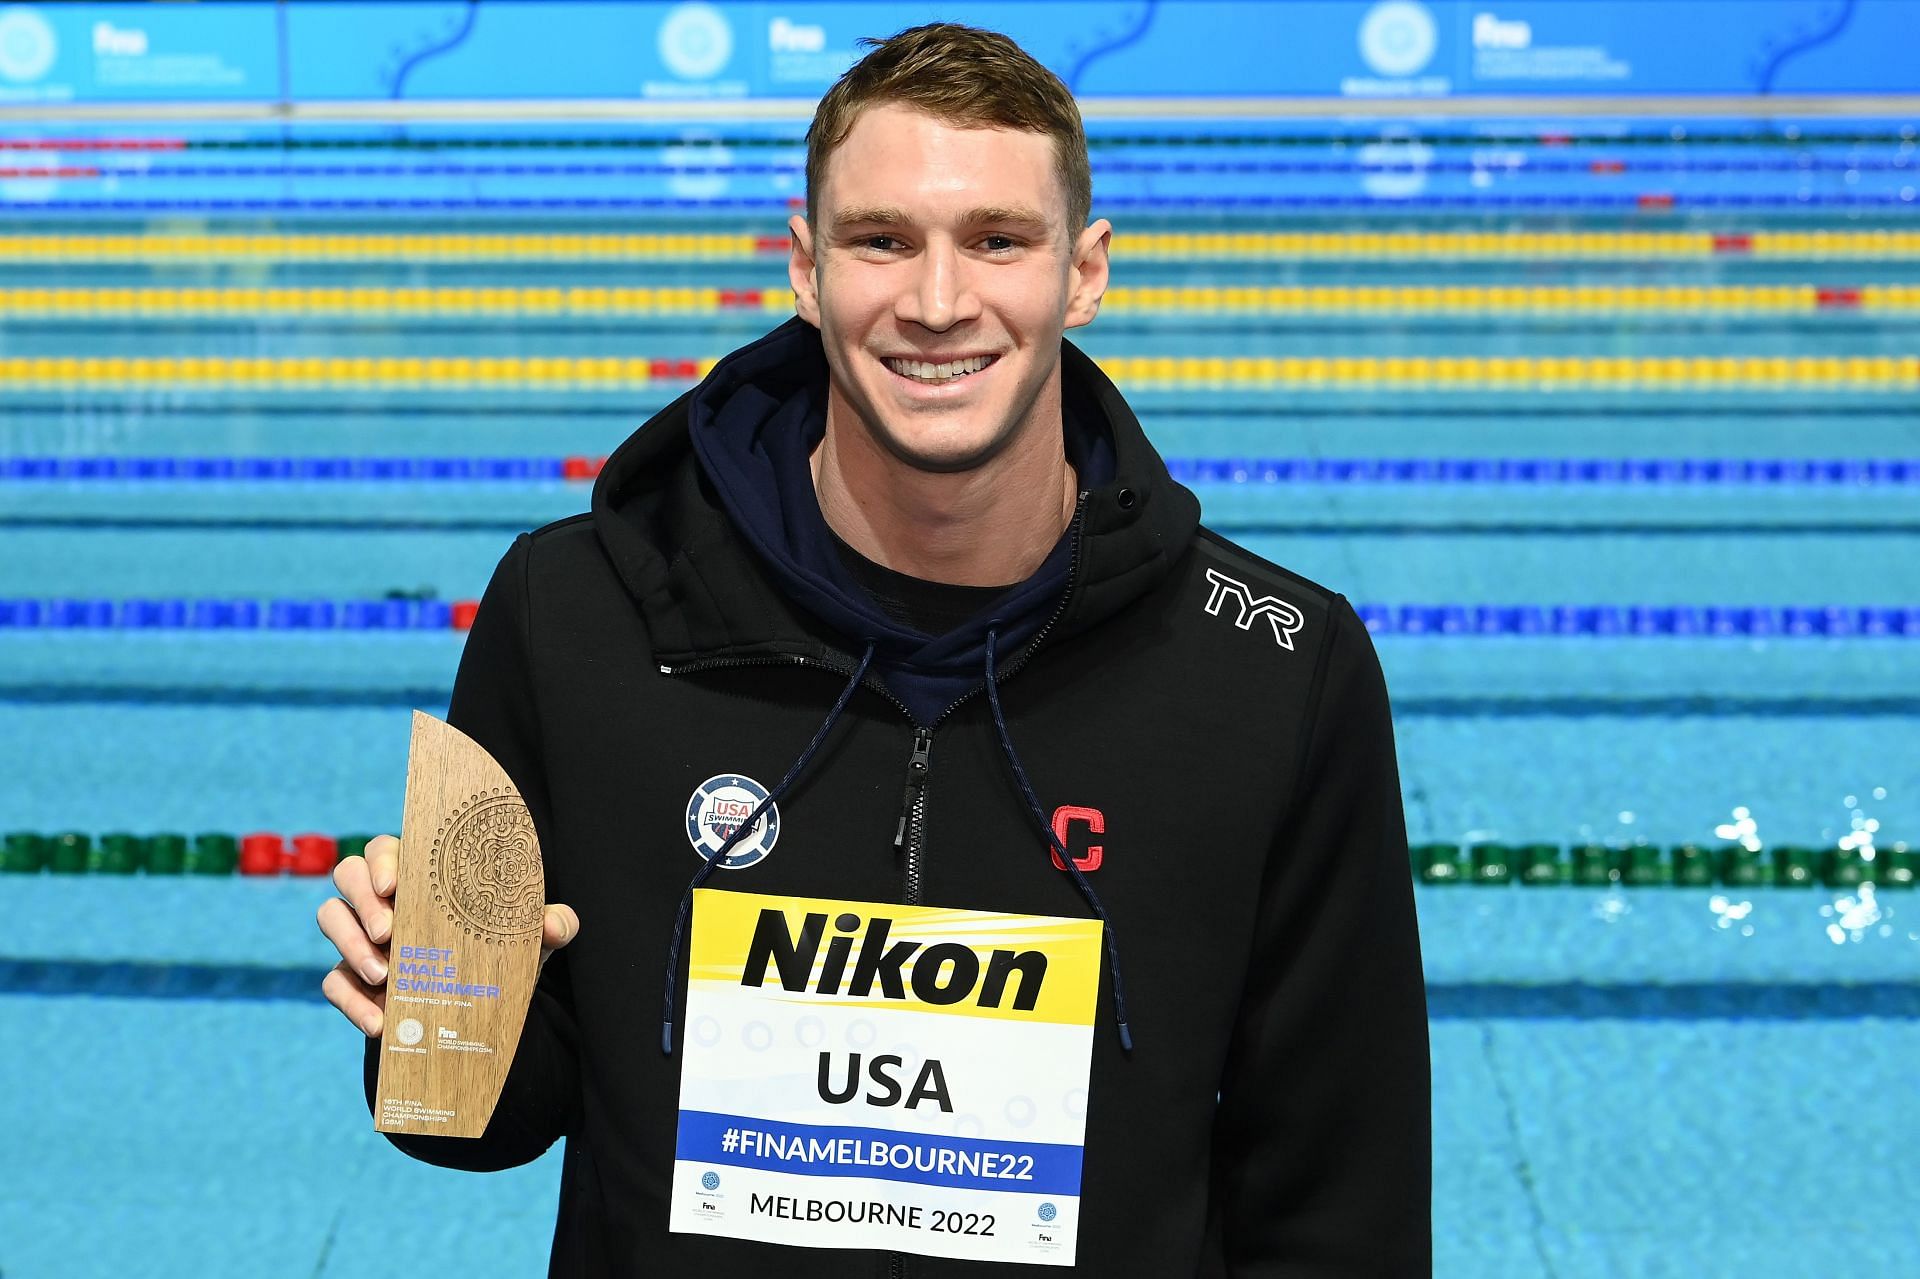 Melbourne 2022 FINA World Short Course Swimming Championships - Day 6